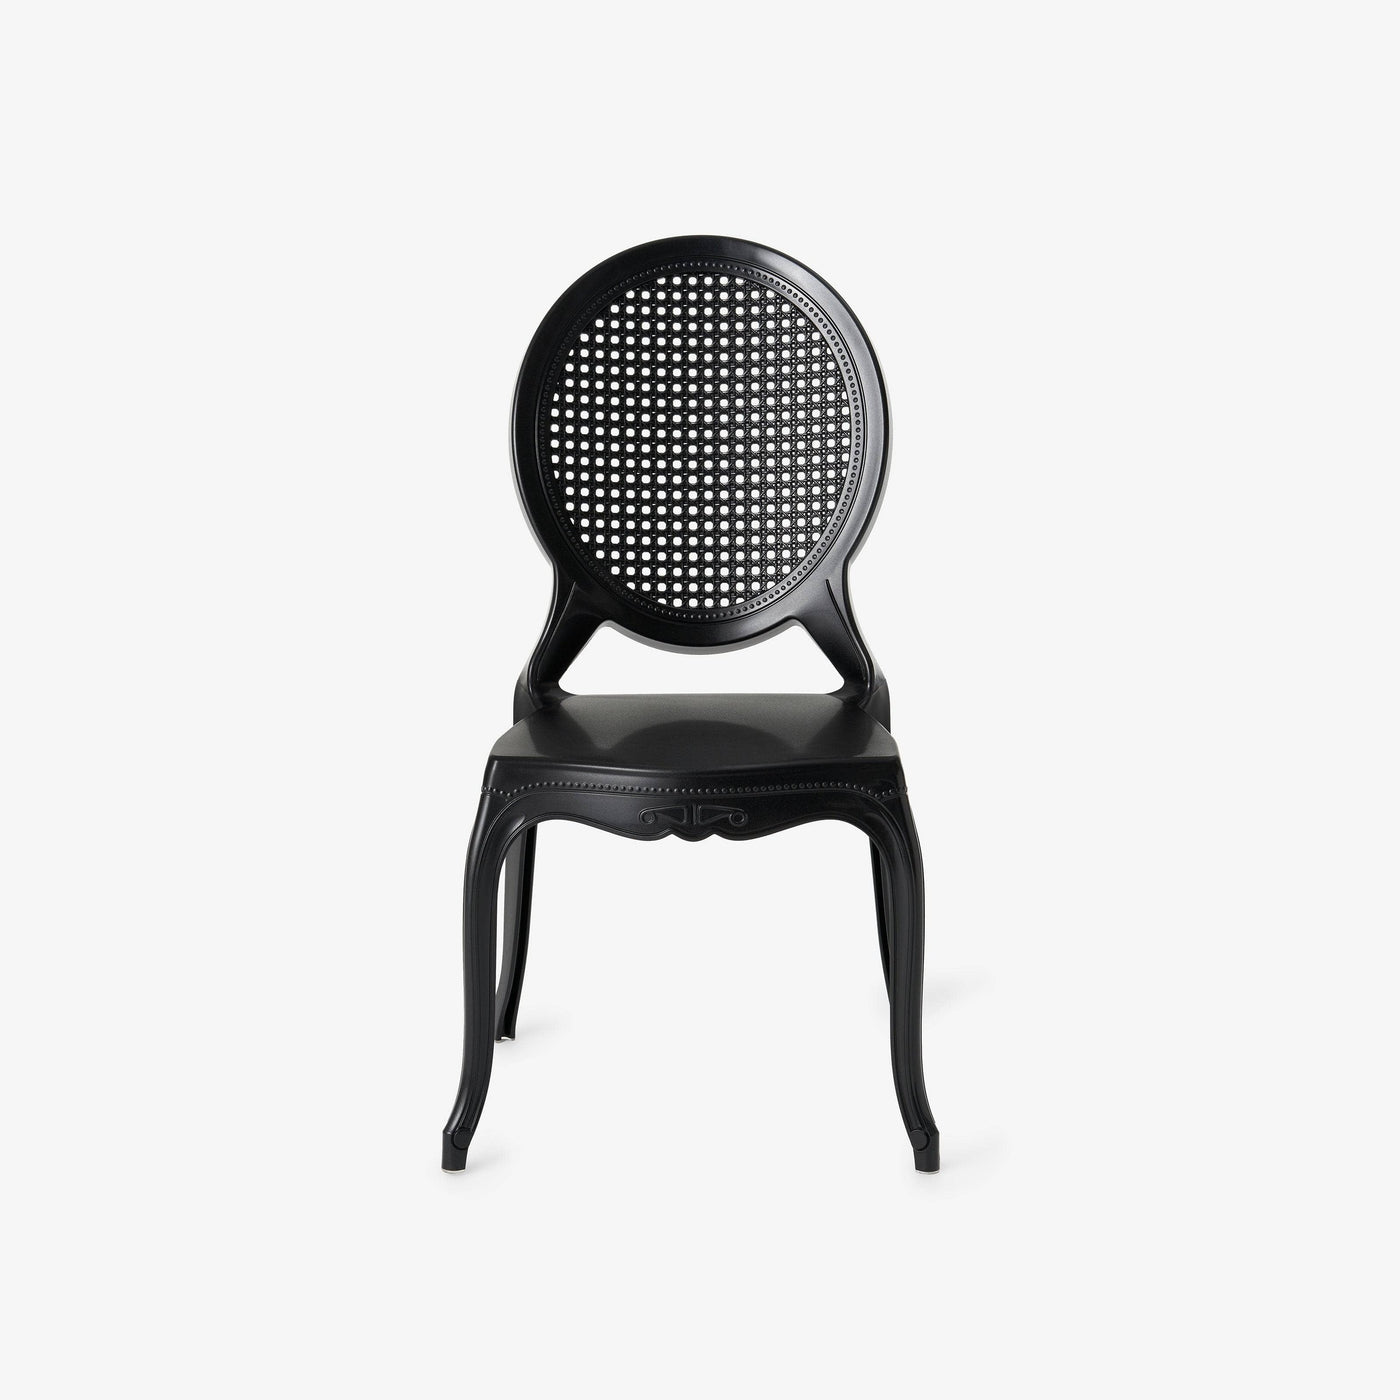 Barco Set of 4 Chairs, Black - 1